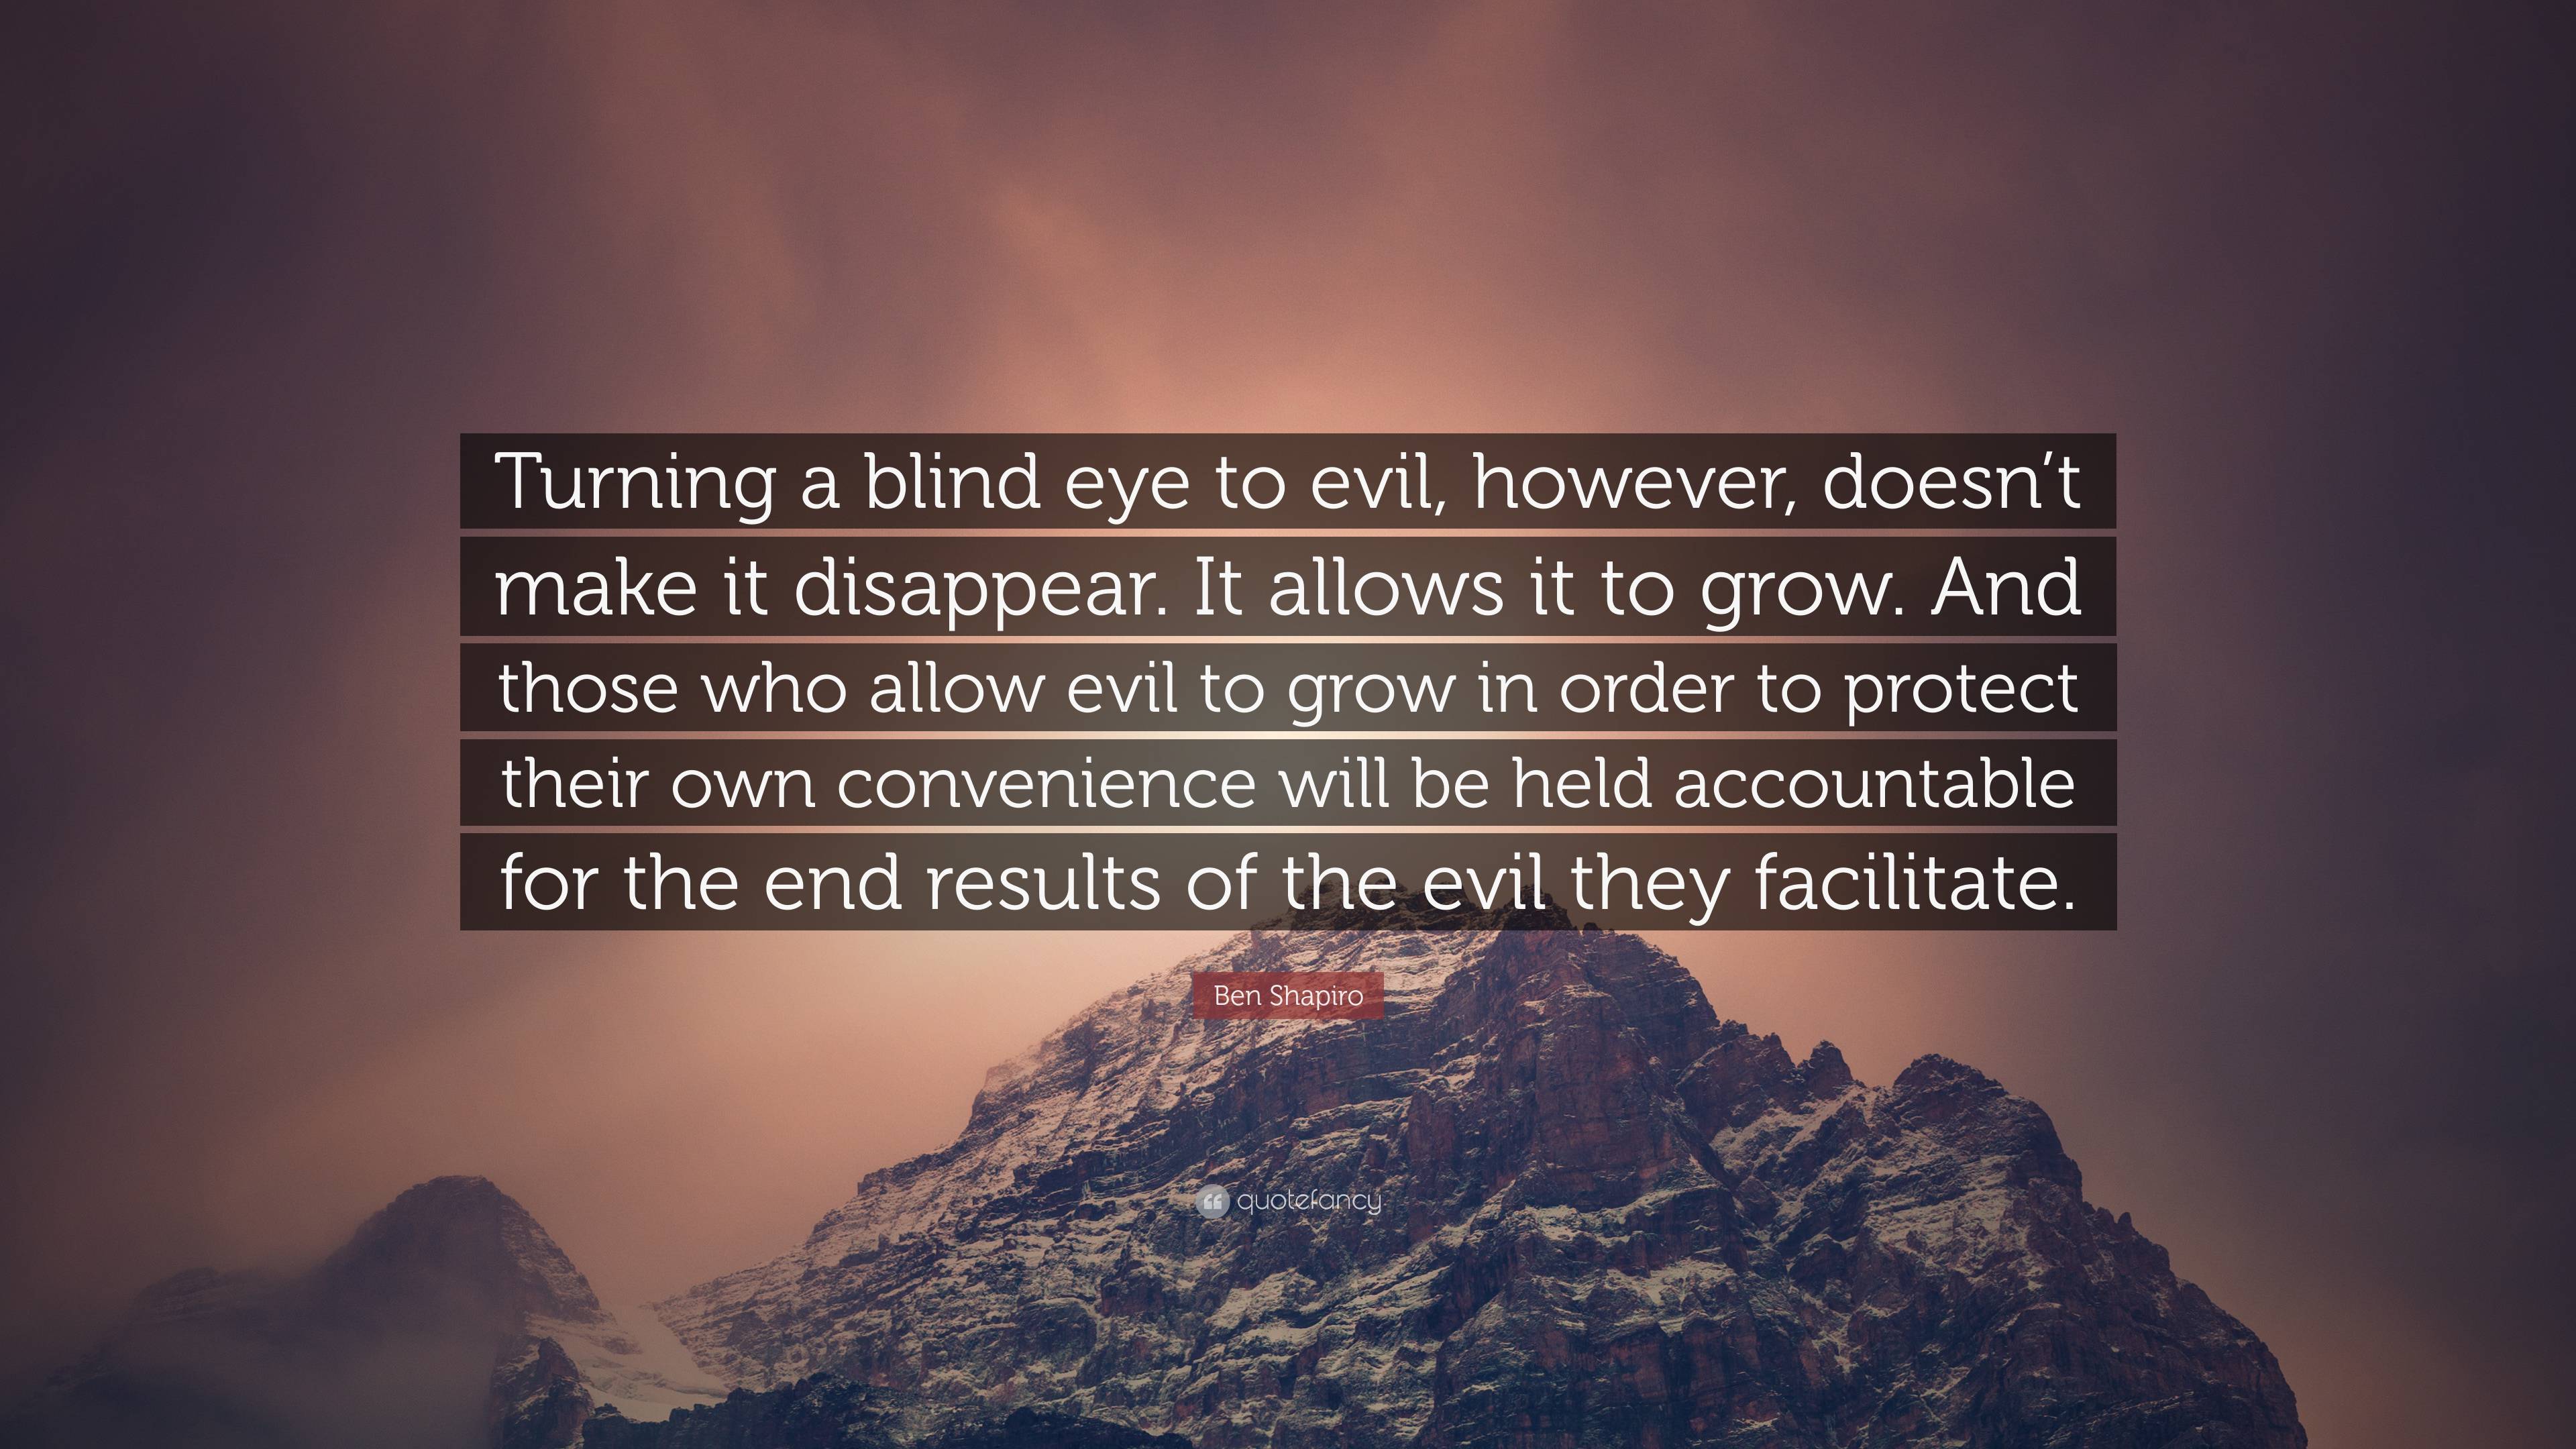 Ben Shapiro Quote: “Turning a blind eye to evil, however, doesn't make it disappear. It allows it to grow. And those who allow evil to grow .”